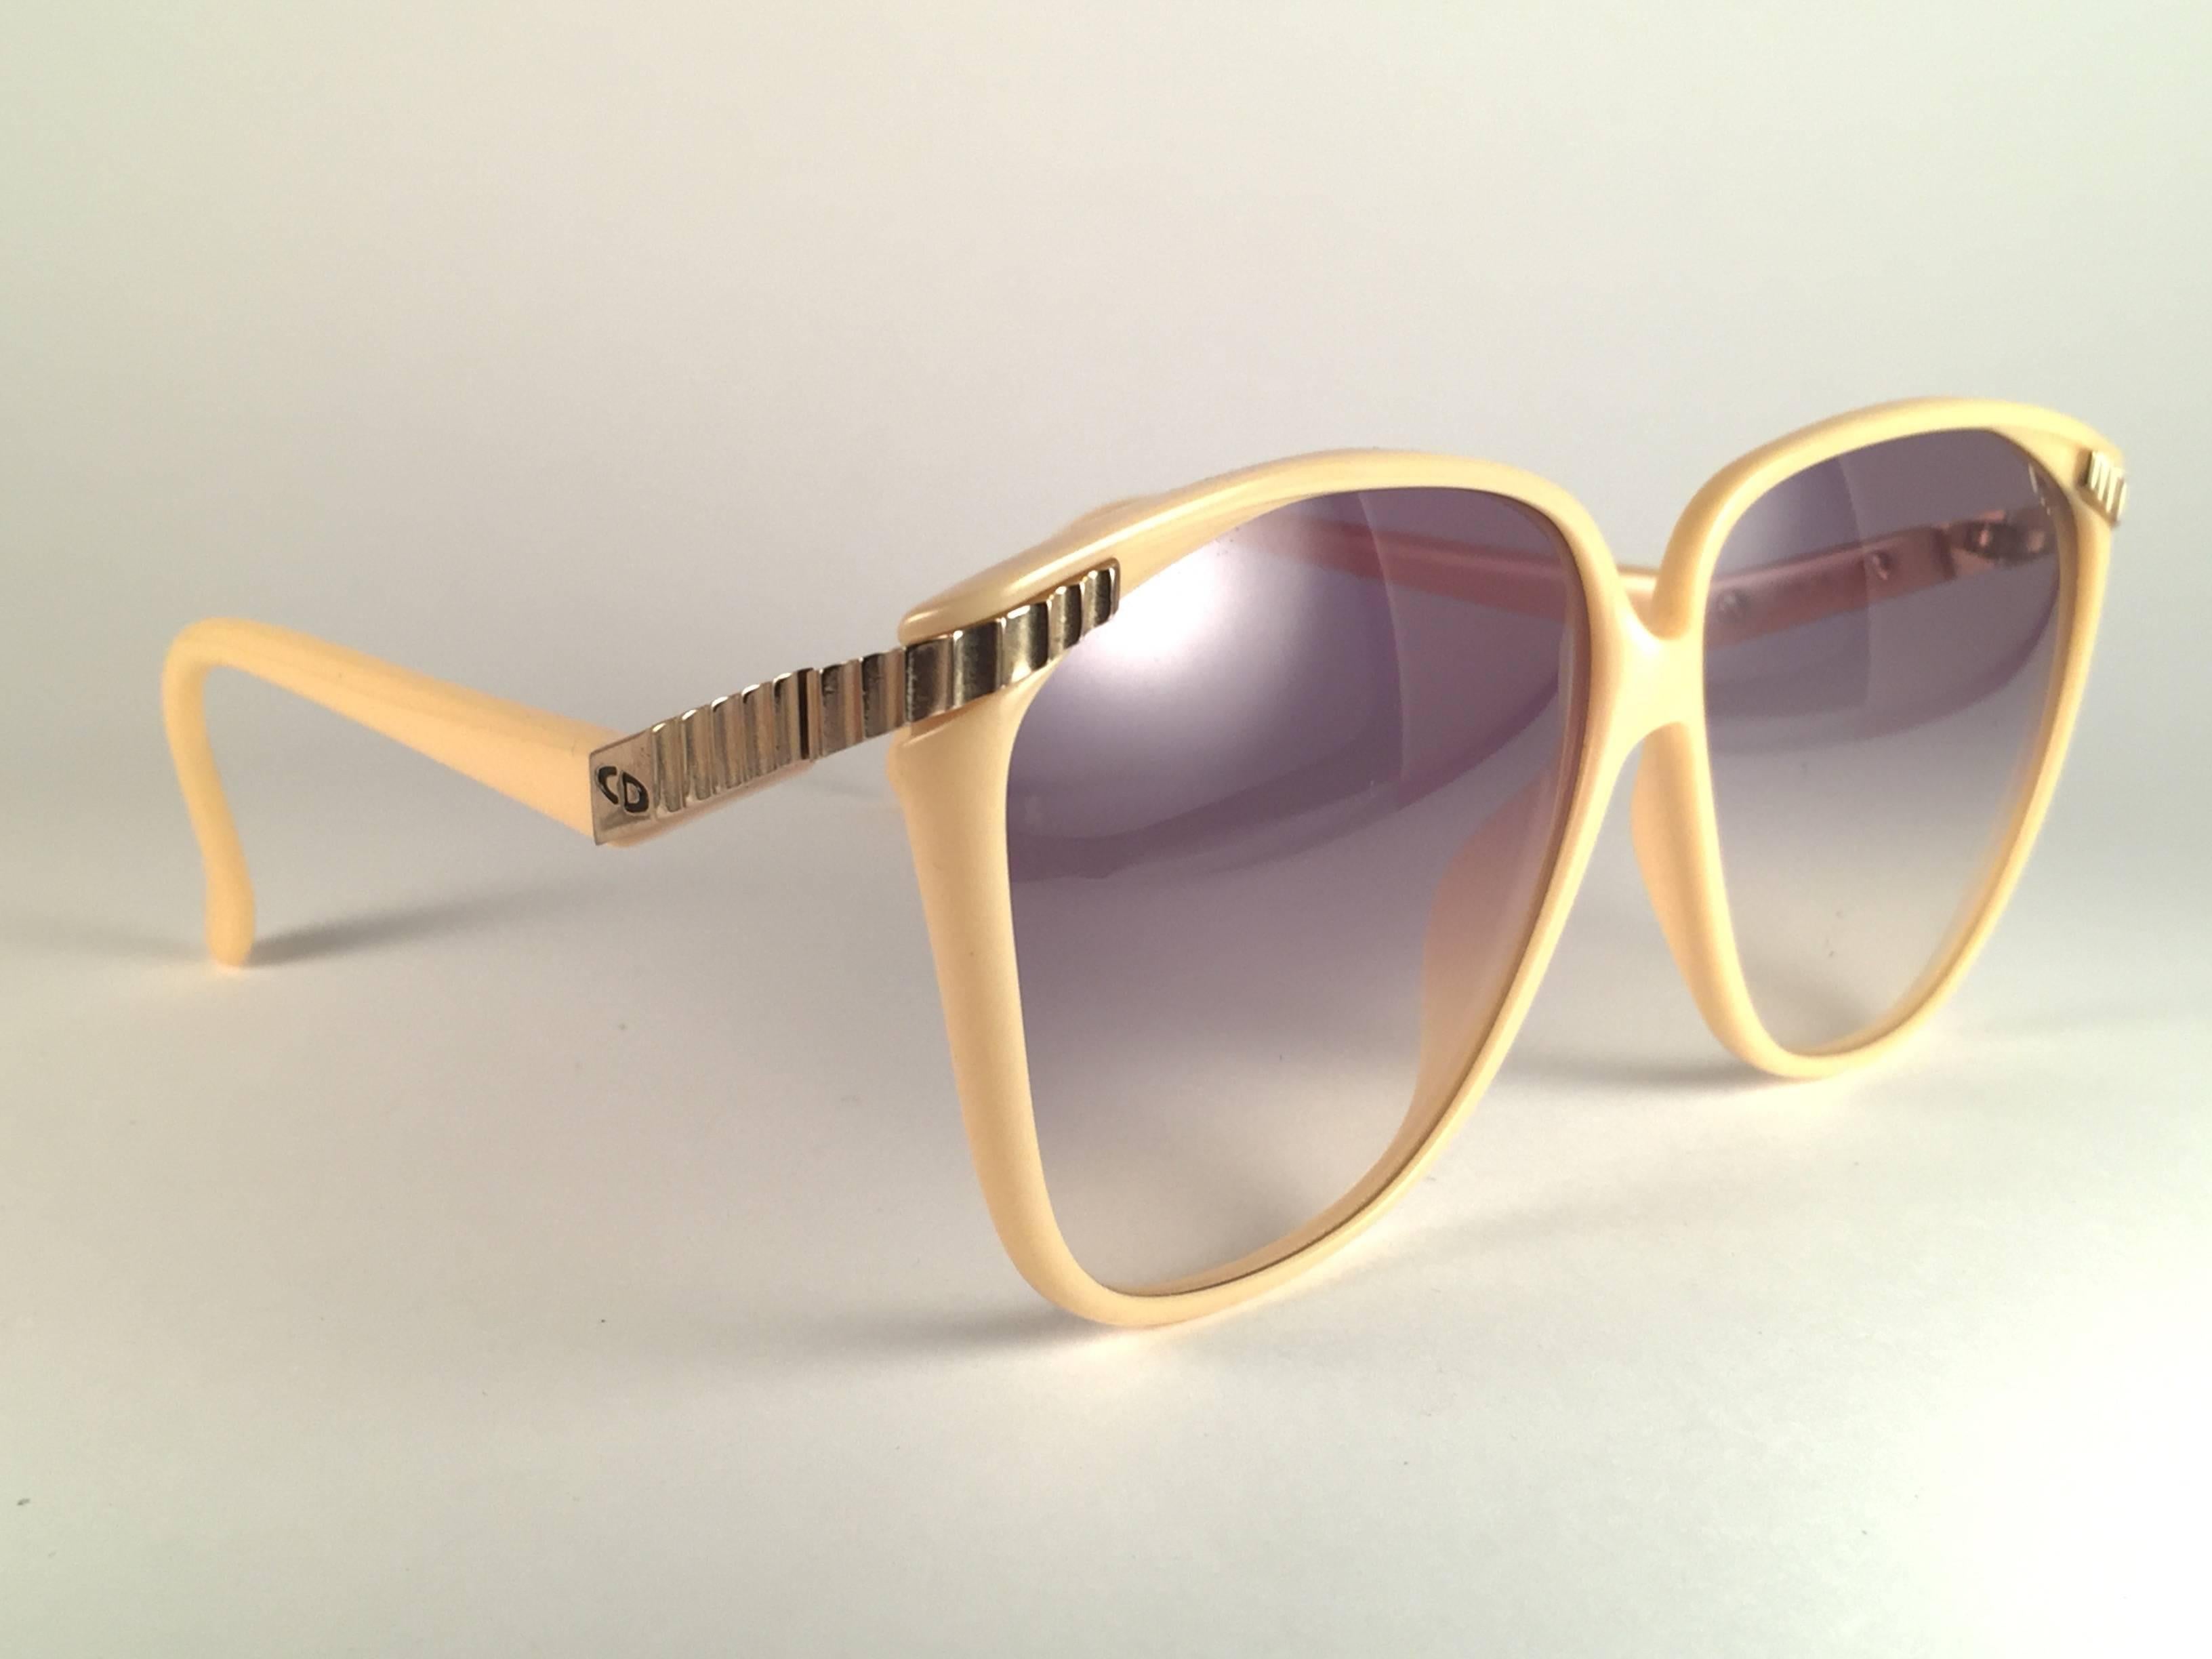 New Vintage Christian Dior 2279 beige with gold accents frame with spotless light blue gradient lenses.   Made in Austria.  Produced and design in 1980's.  New, never worn or displayed. Comes with its original silver Christian Dior Lunettes sleeve.